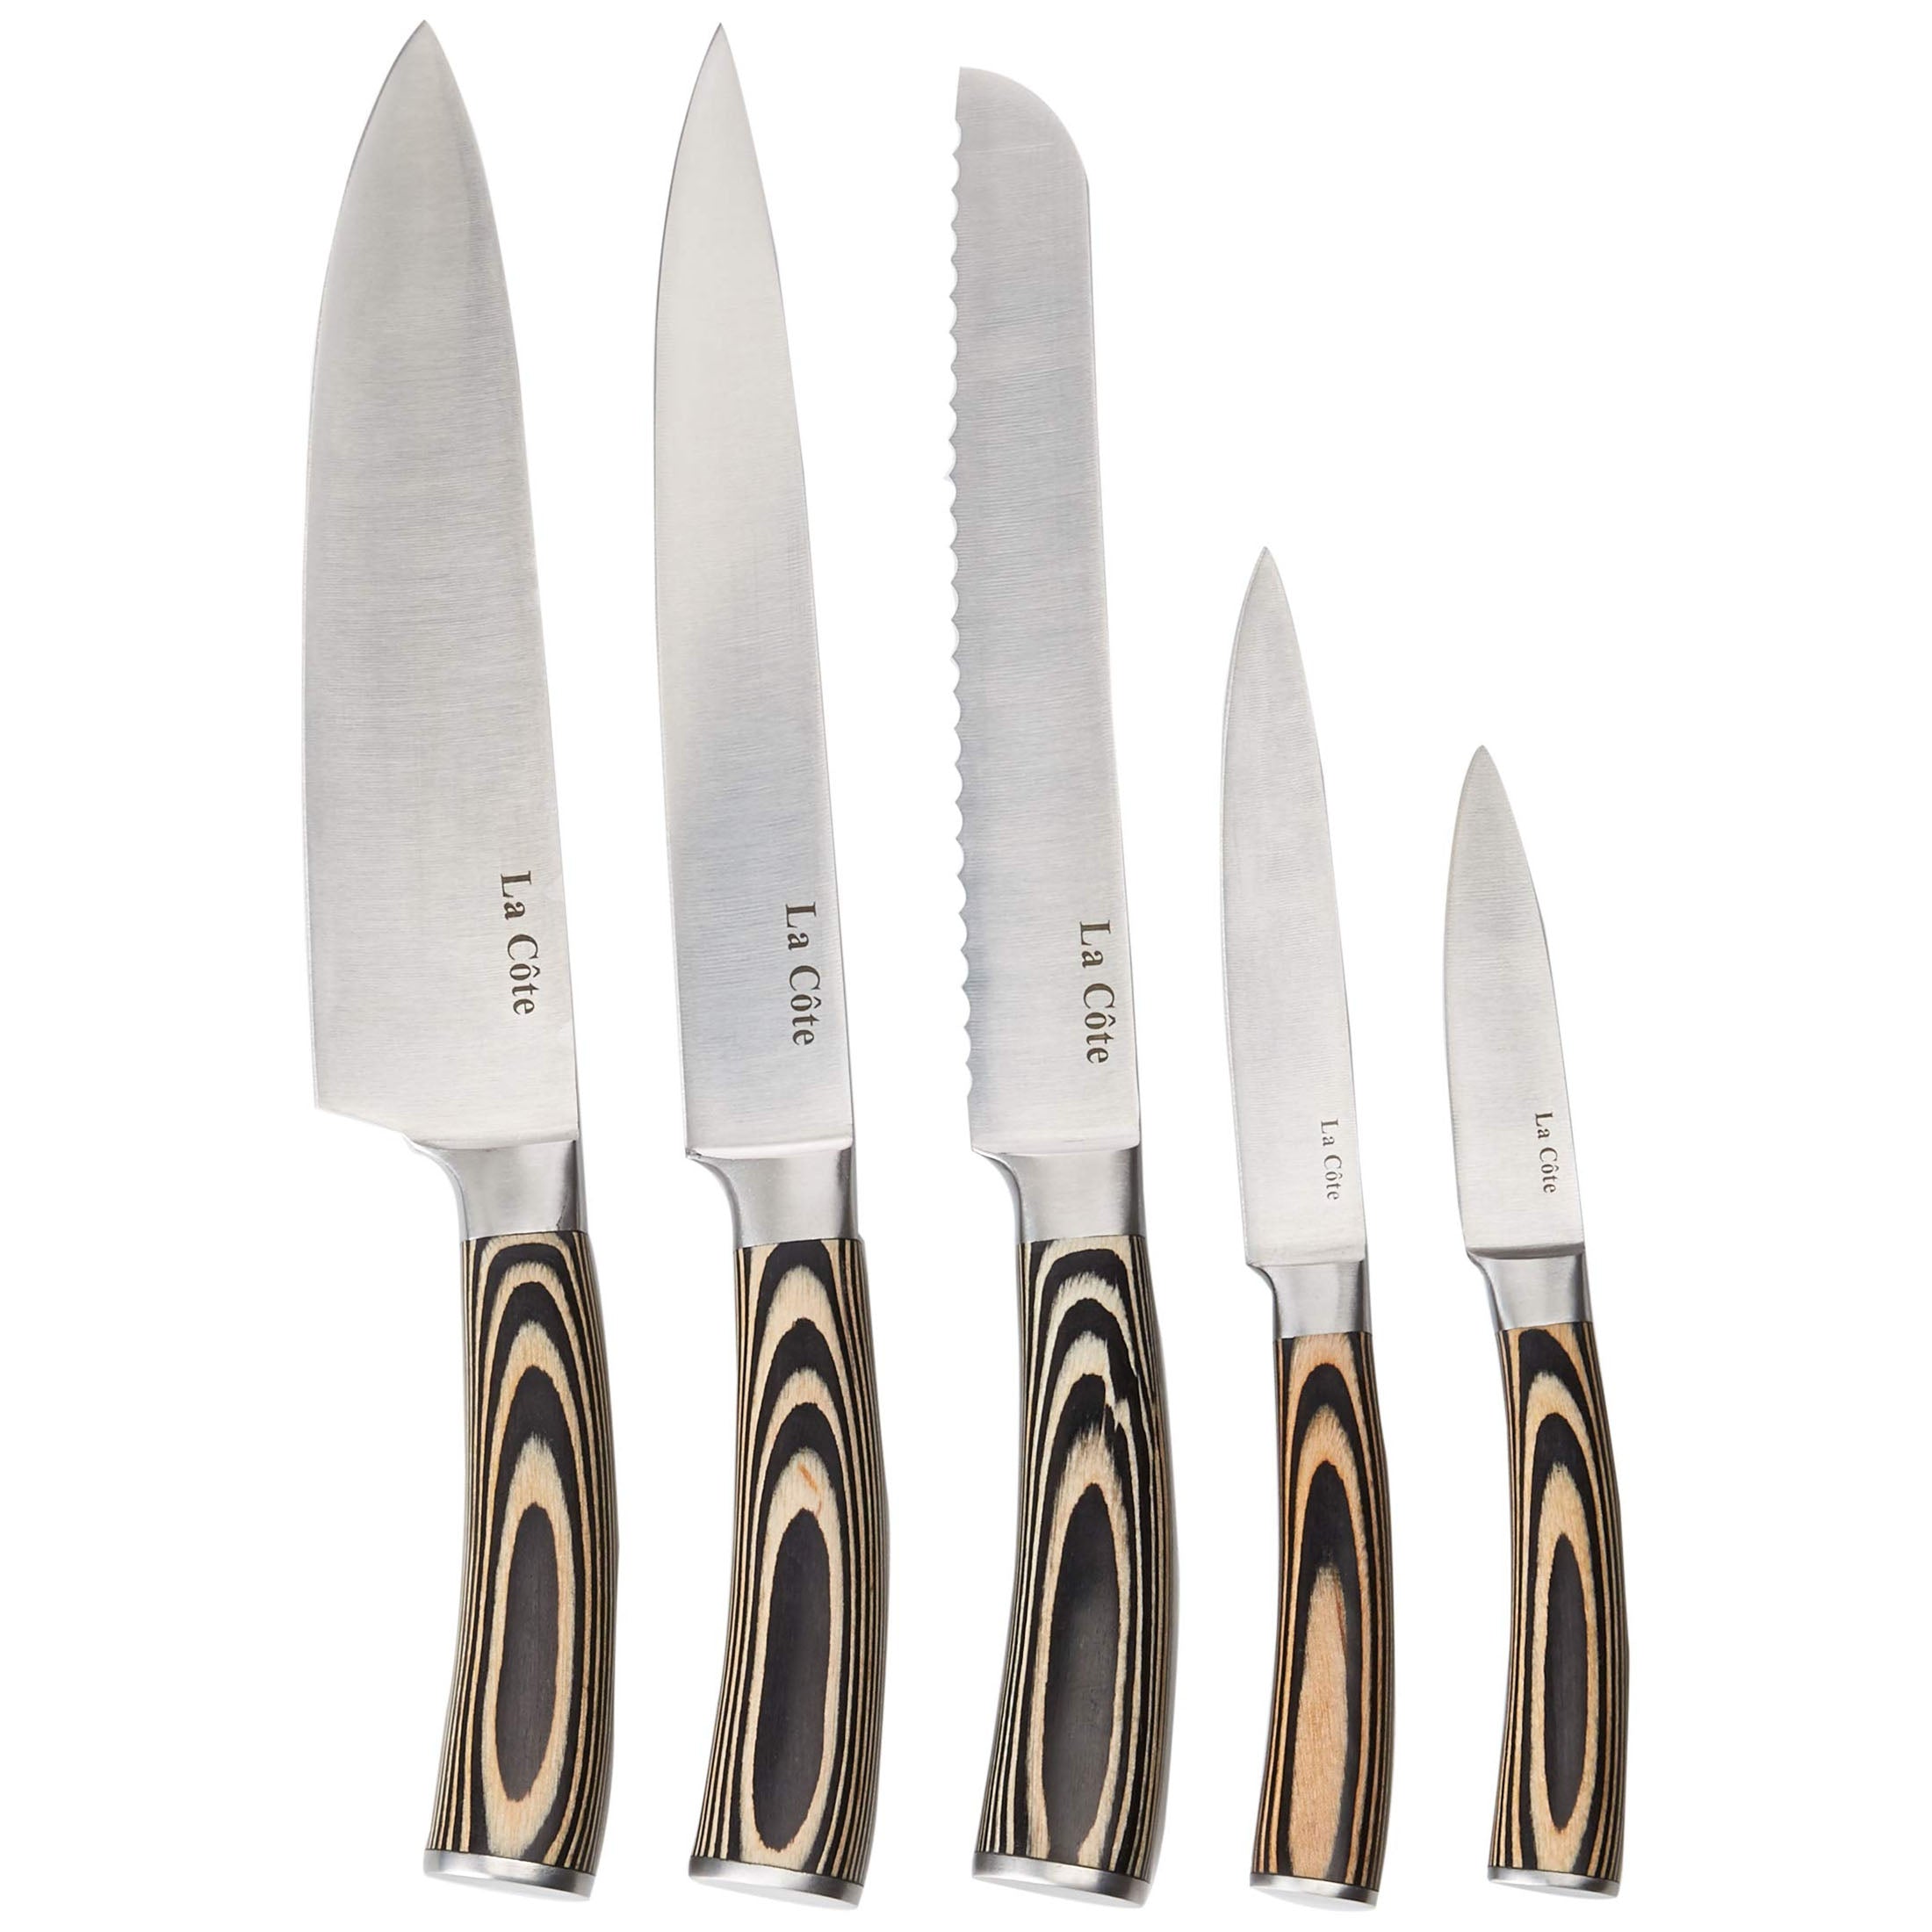 La Cote 5 Piece Chef Knives Set Japanese Stainless Steel Wood Handle with Block (Pakka Wood Zerba with Block)